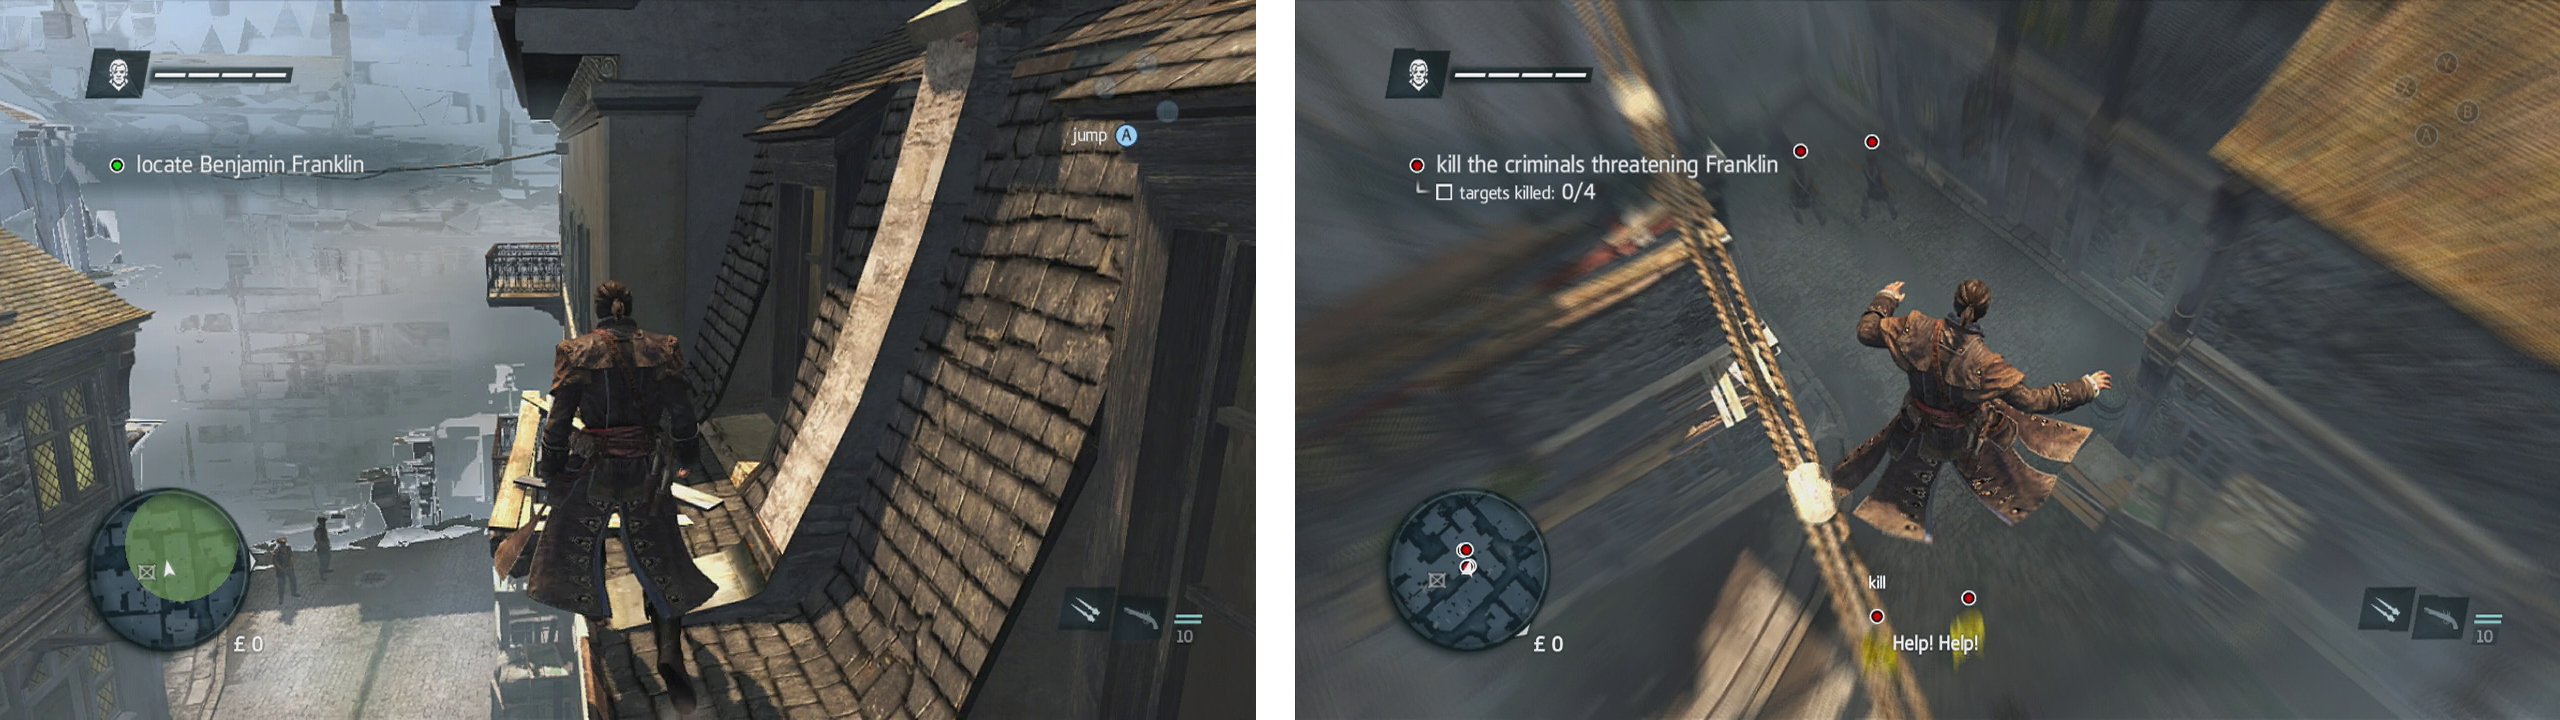 Use eagle vision from the rooftops to find the target (left). Drop down and kill the four criminals (right).